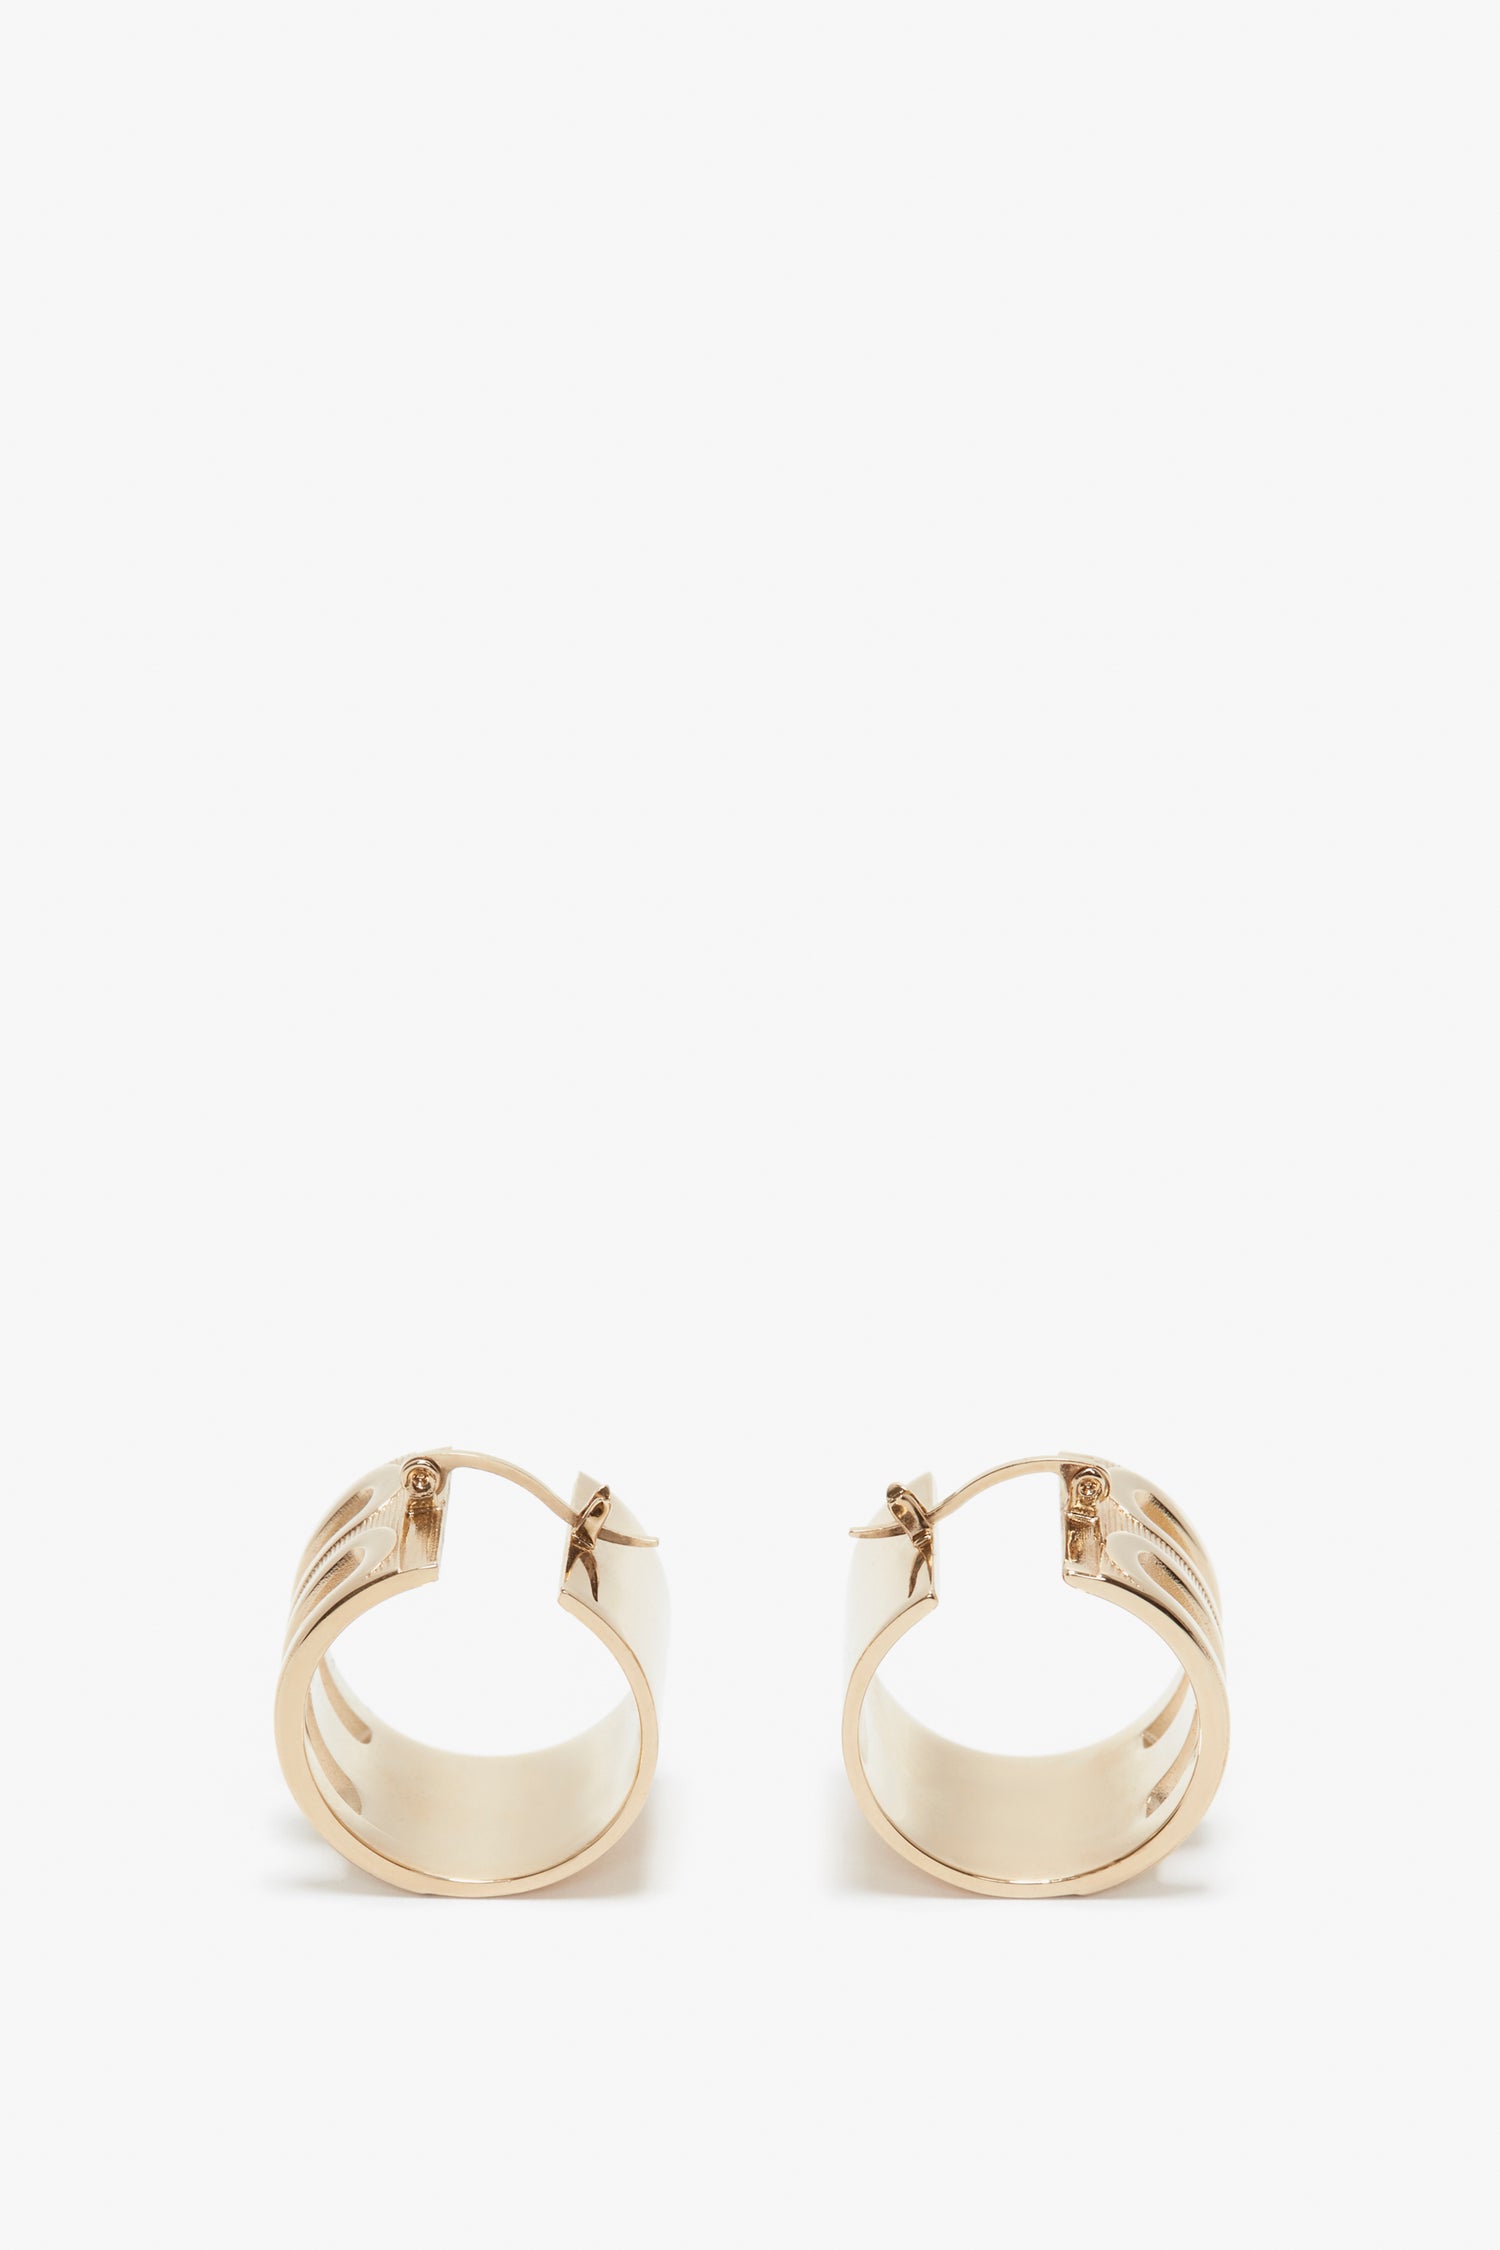 A pair of Exclusive Frame Hoop Earrings In Gold by Victoria Beckham with a latch back, isolated on a white background.